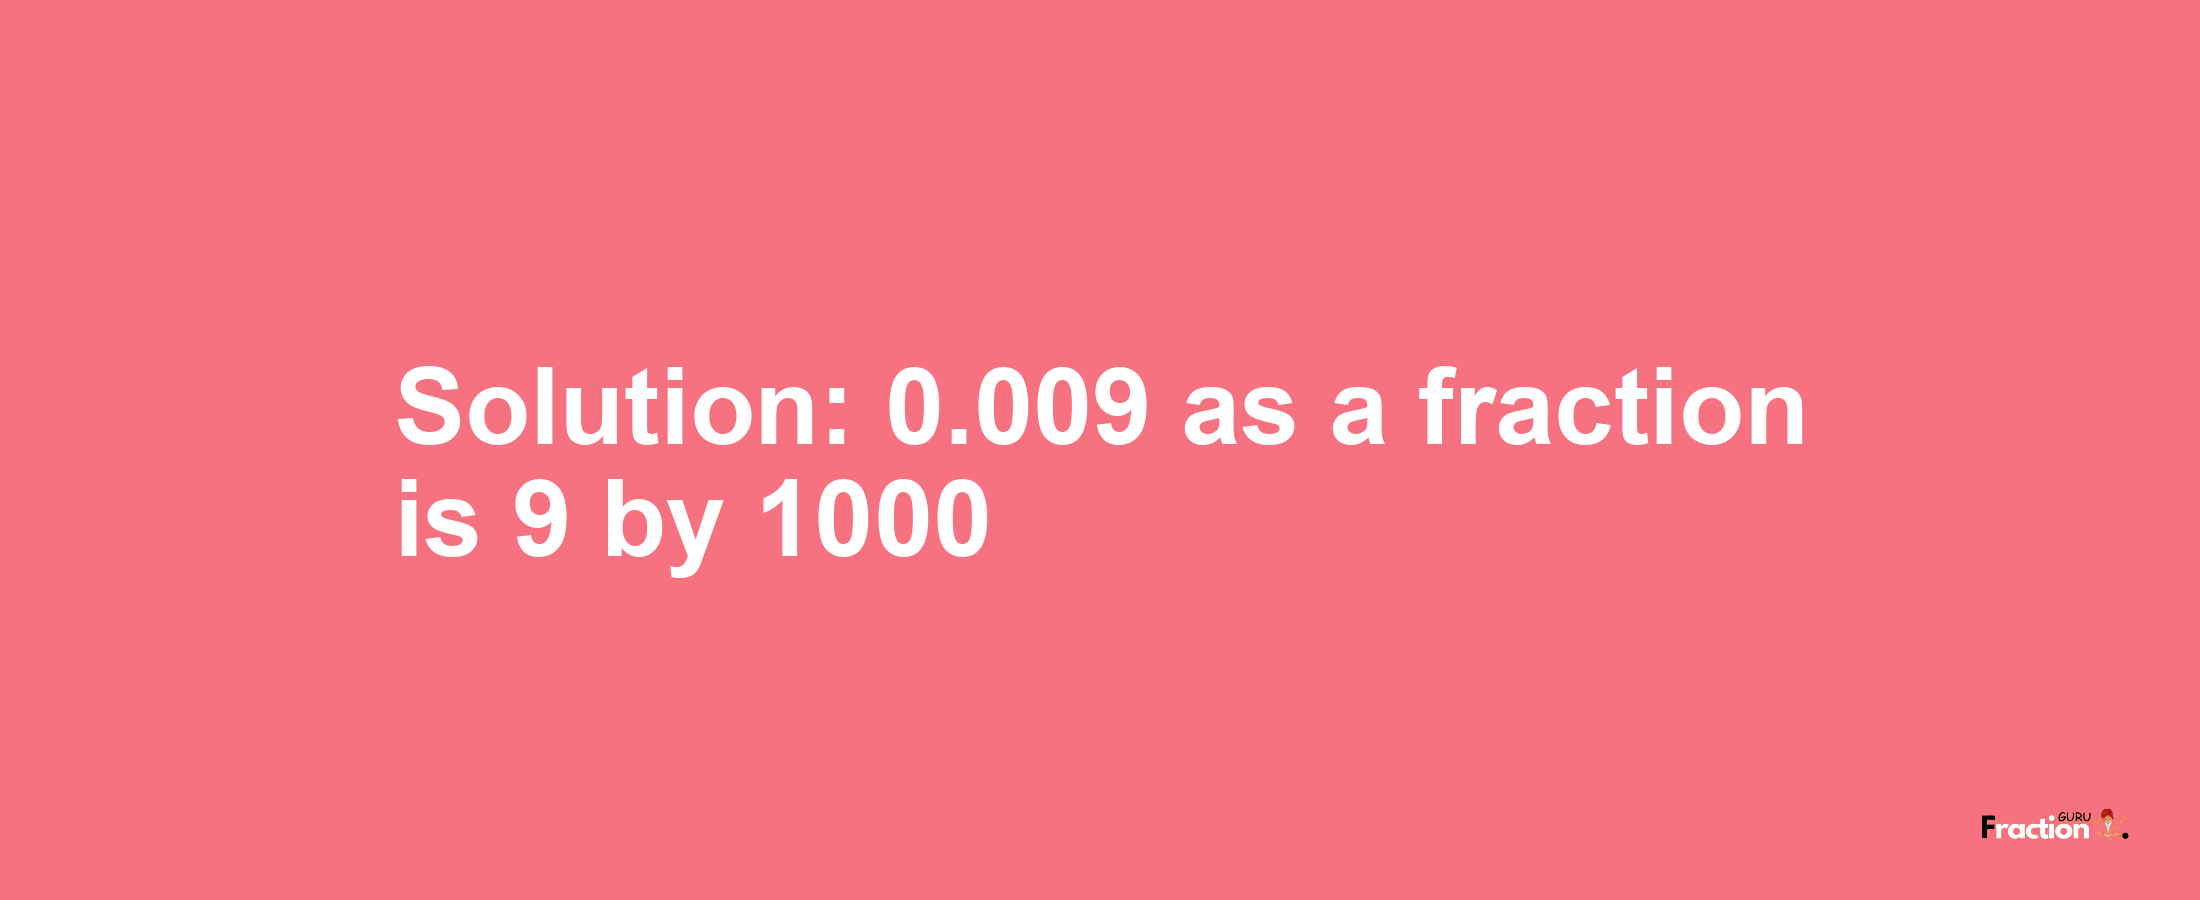 Solution:0.009 as a fraction is 9/1000